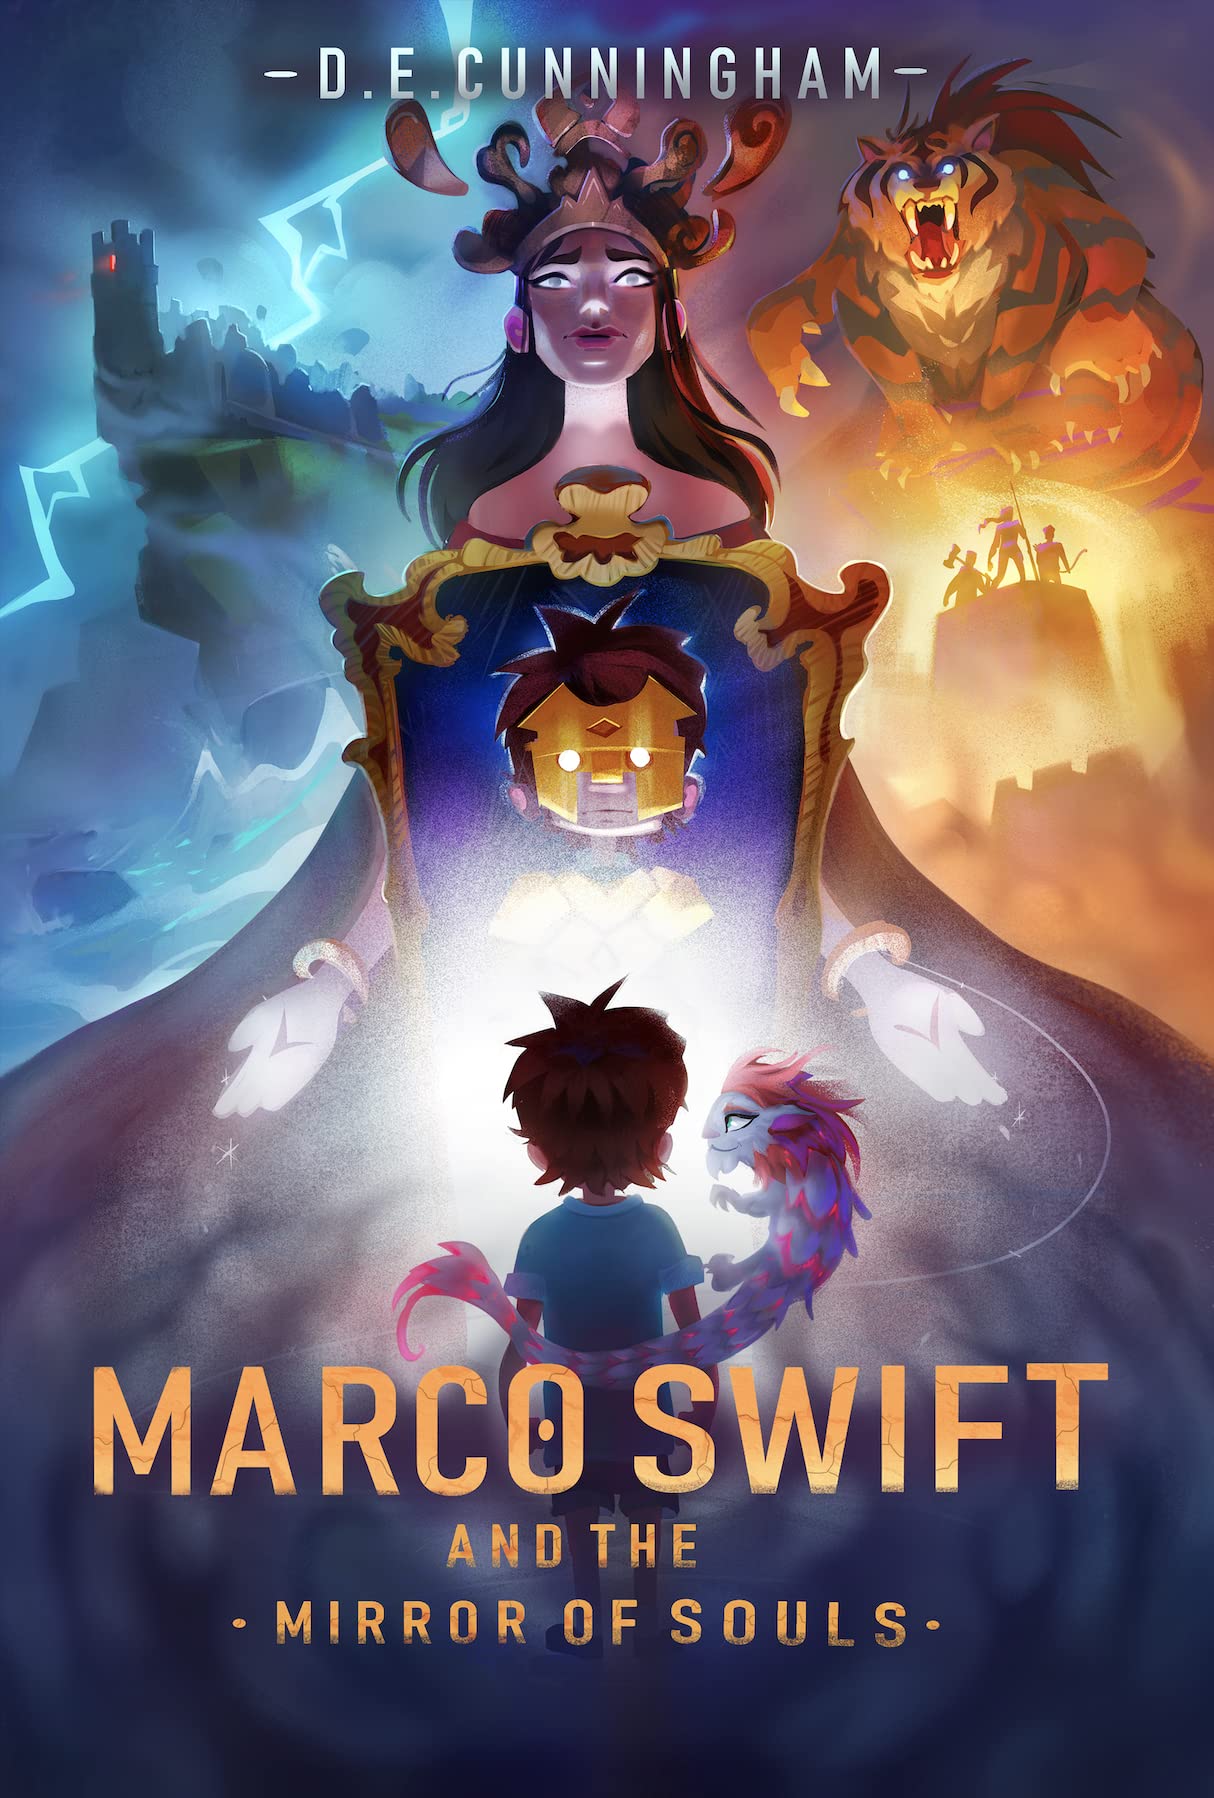 book cover for Marco Swift and the mirror of souls by D.E. Cunningham